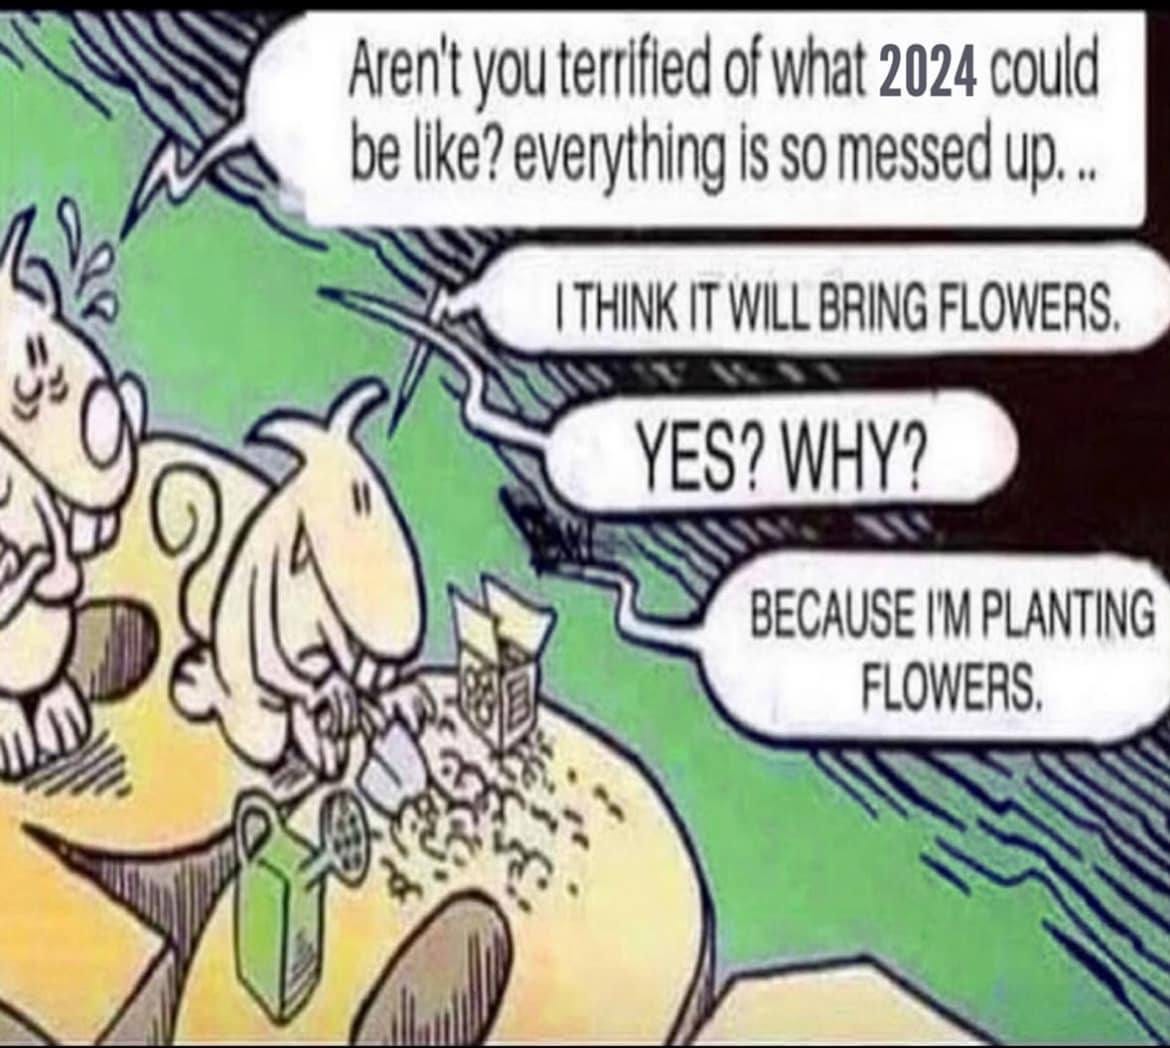 May be an image of flower and text that says 'Aren't you terrified of what 2024 could be like? everything is so messed up... ITHINK IT WILL BRING FLOWERS. YES? WHY? BECAUSE I'M PLANTING FLOWERS.'